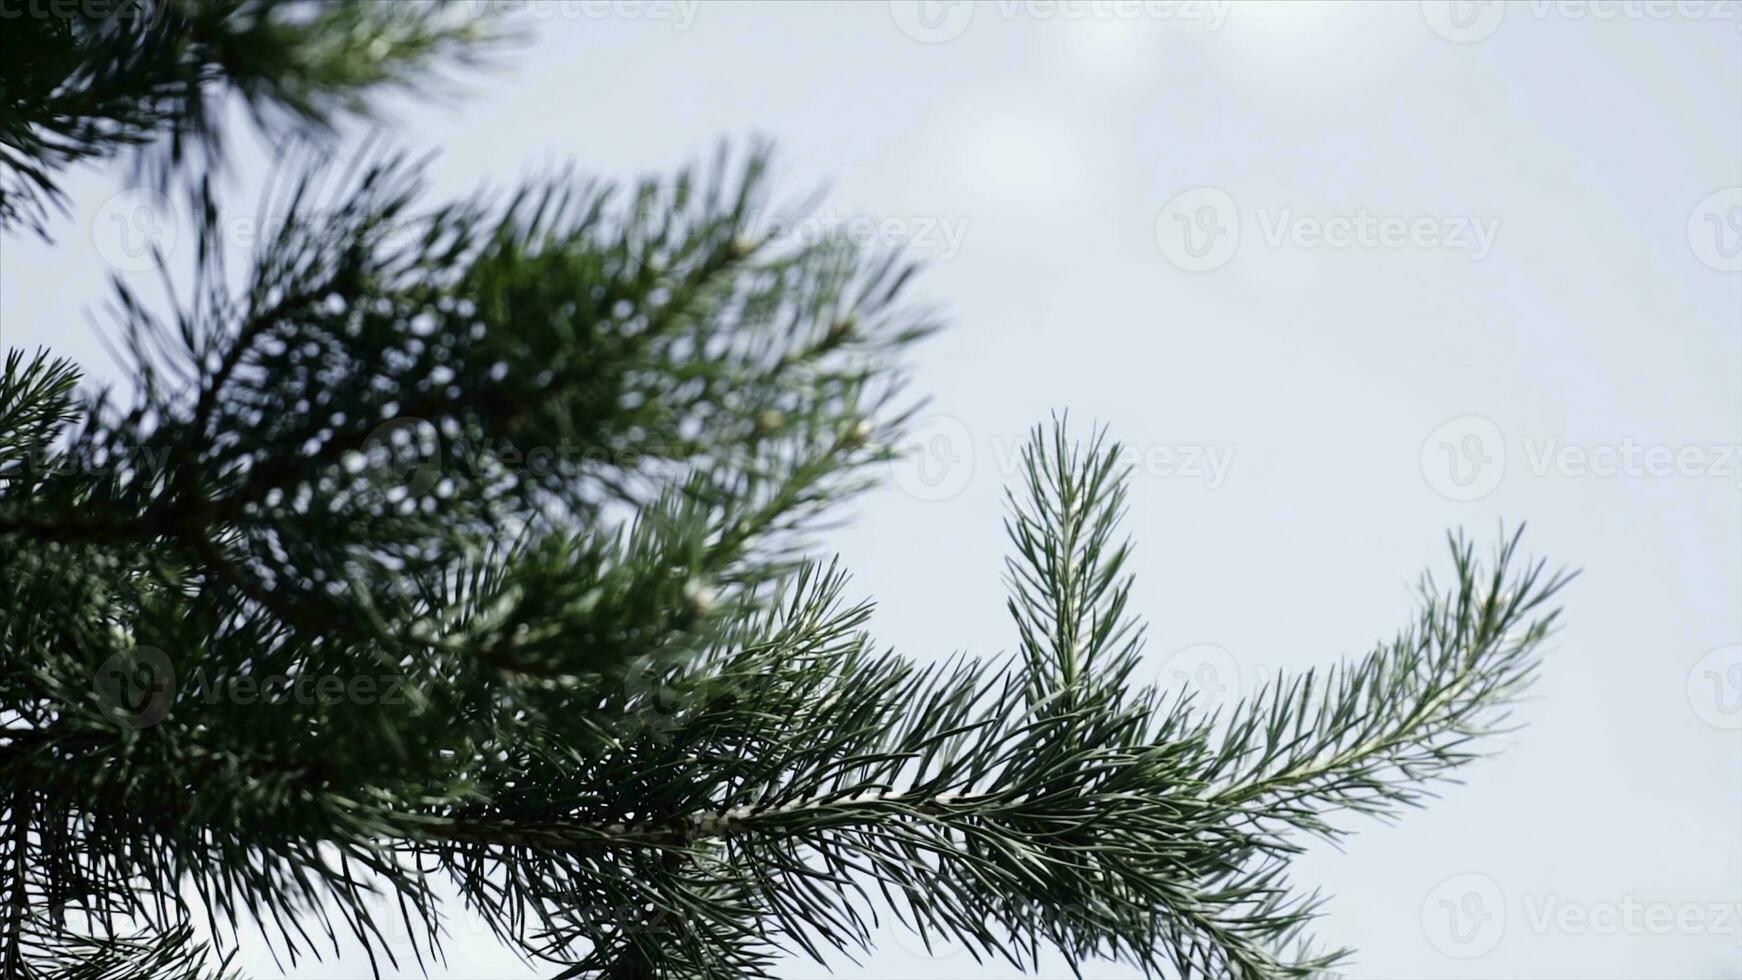 Green prickly branches of a fur-tree or pine. Nice fir branches. Close up. Bright evergreen fresh pine tree green needles branches. New fir-tree needles, conifer photo